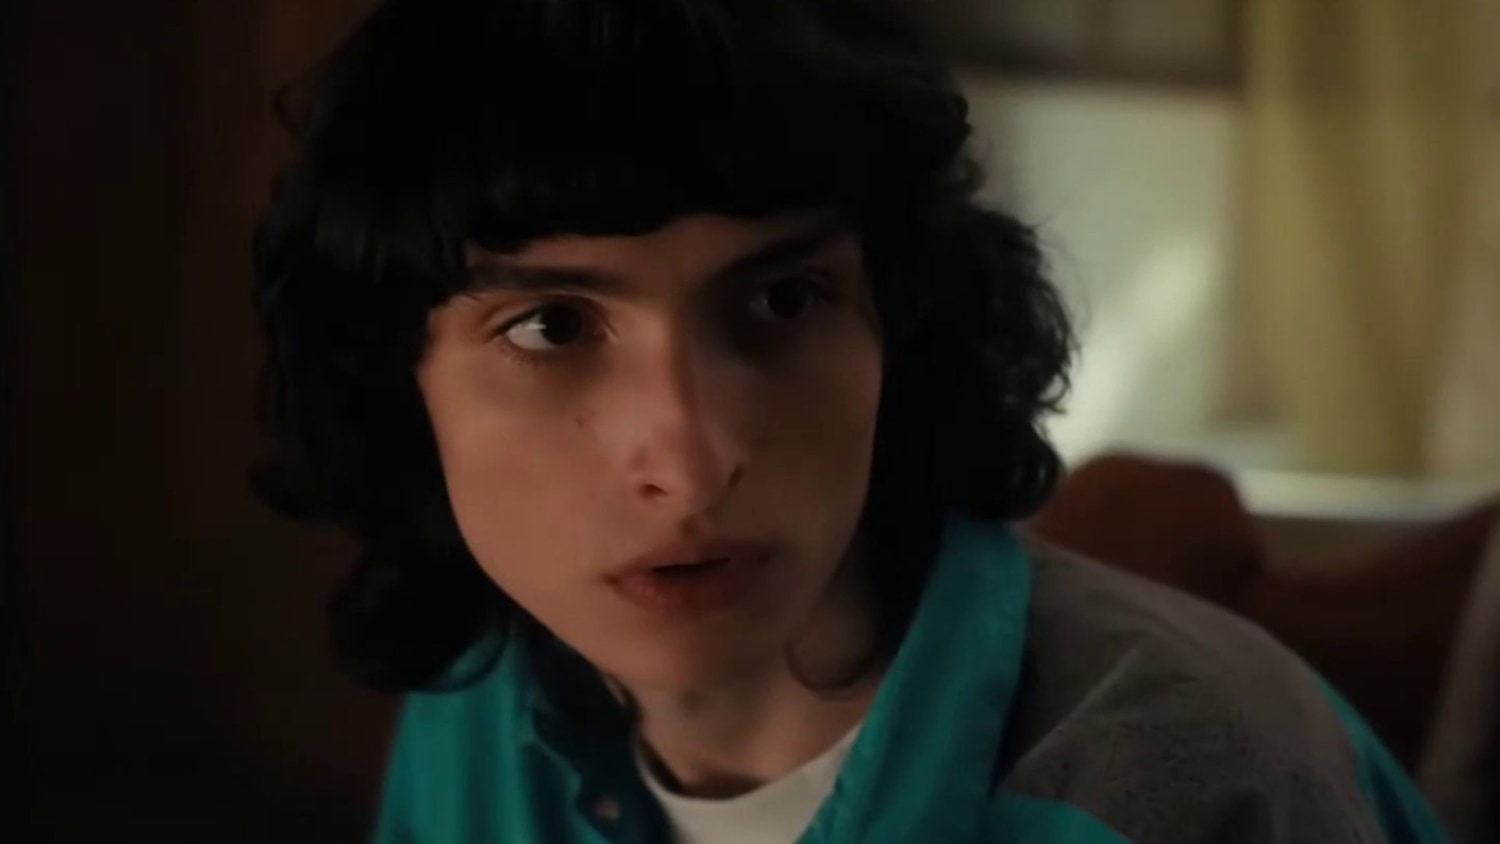 Stranger Things Season 5: Everything we know about the Millie